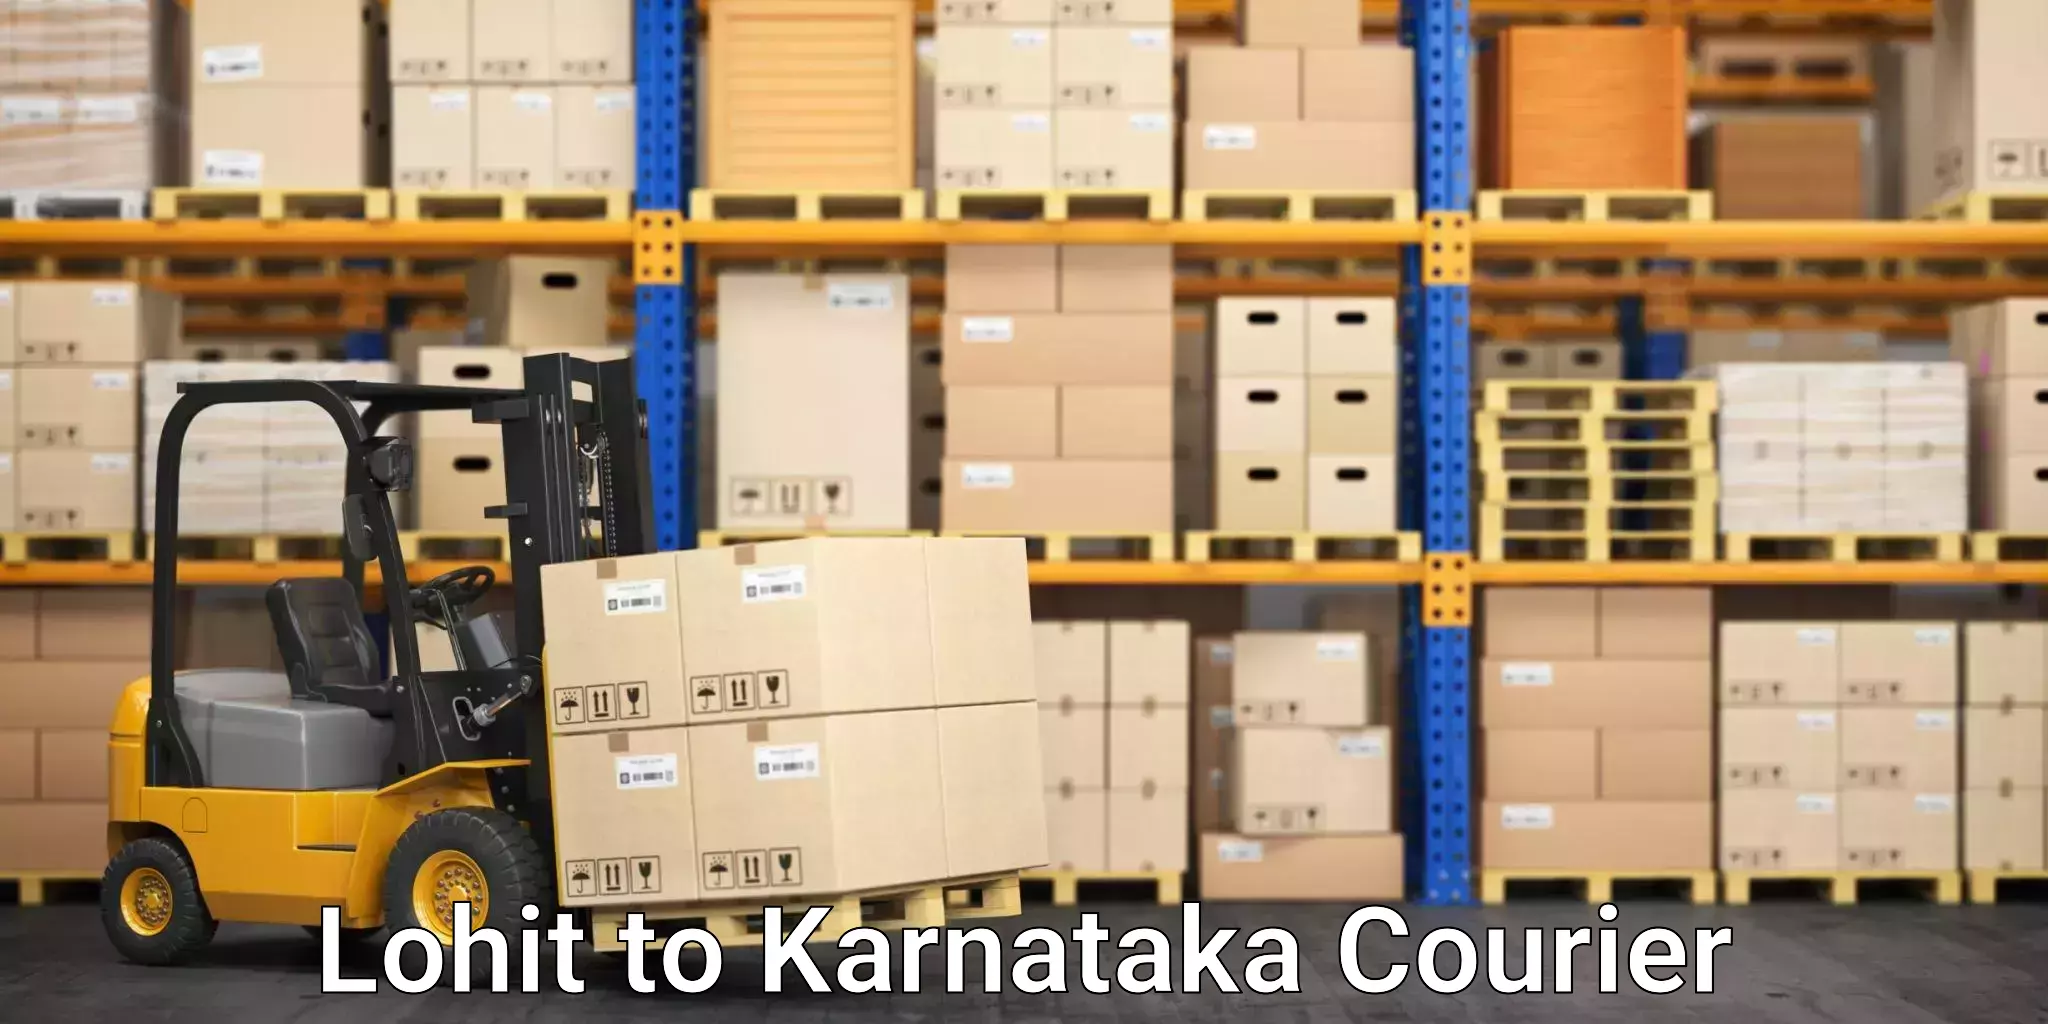 State-of-the-art courier technology Lohit to Gulbarga